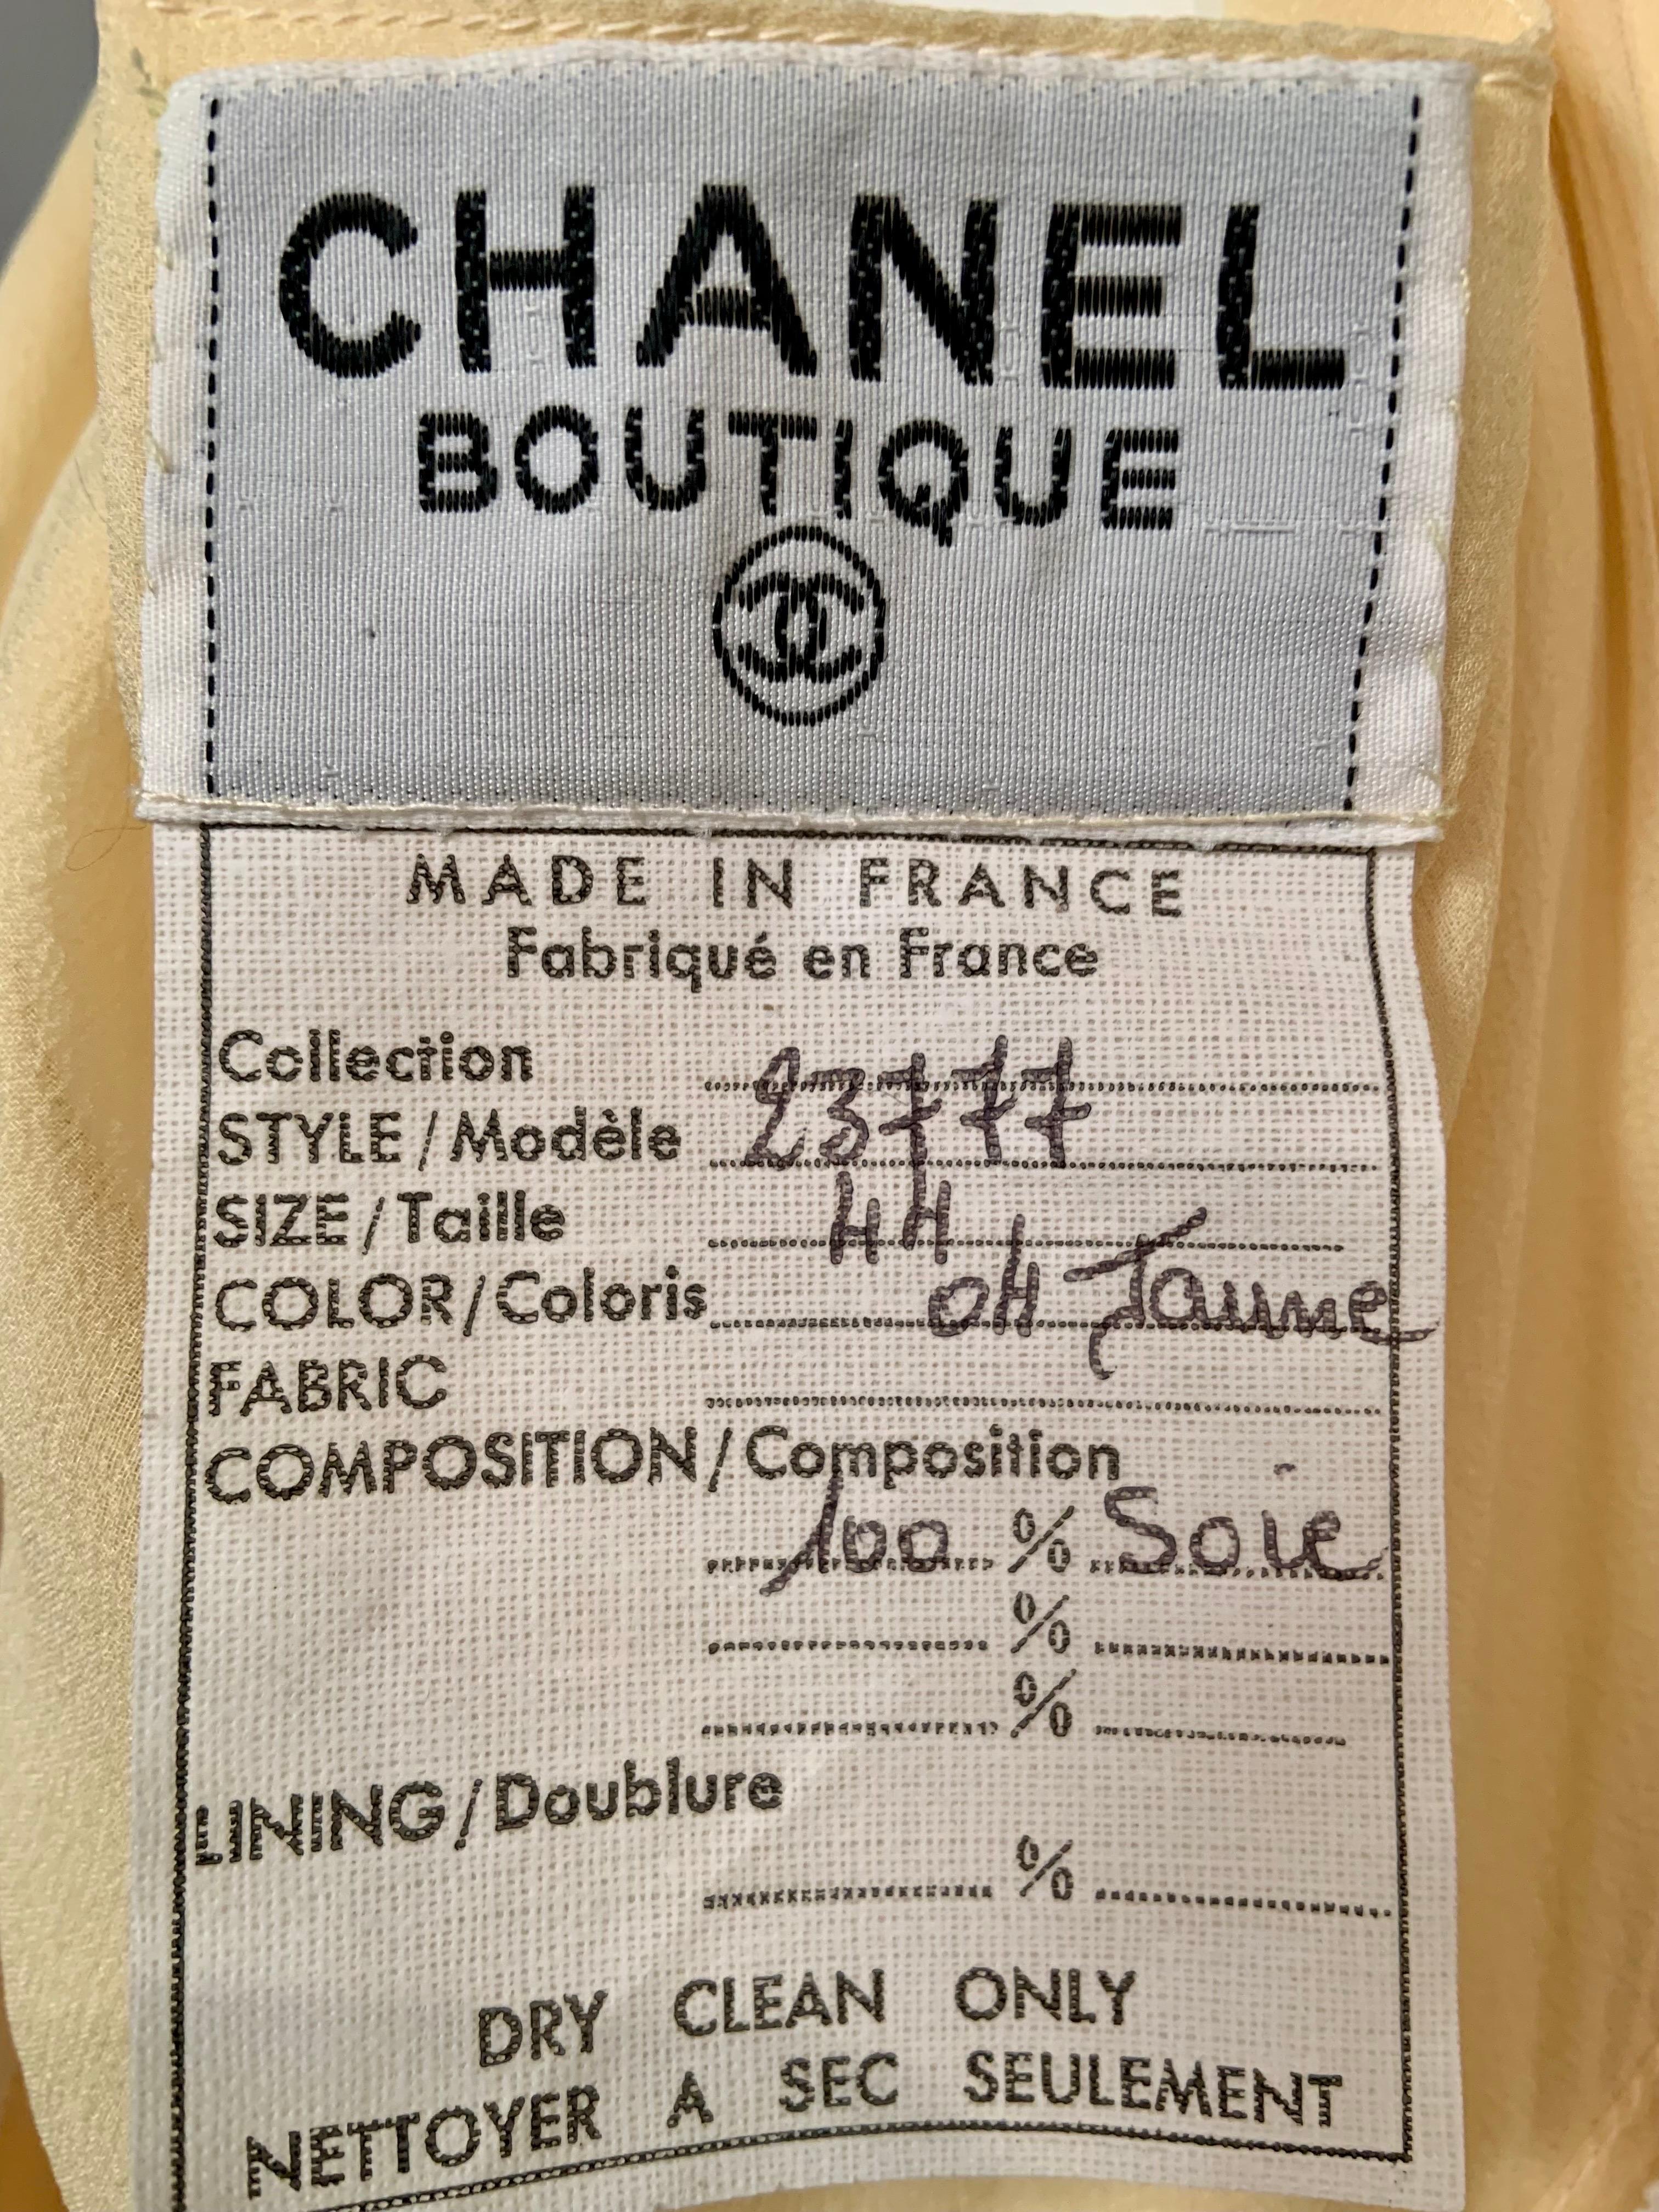 1984 Chanel by Karl Lagerfeld Butter Yellow Silk Chiffon Evening Gown Never Worn 12